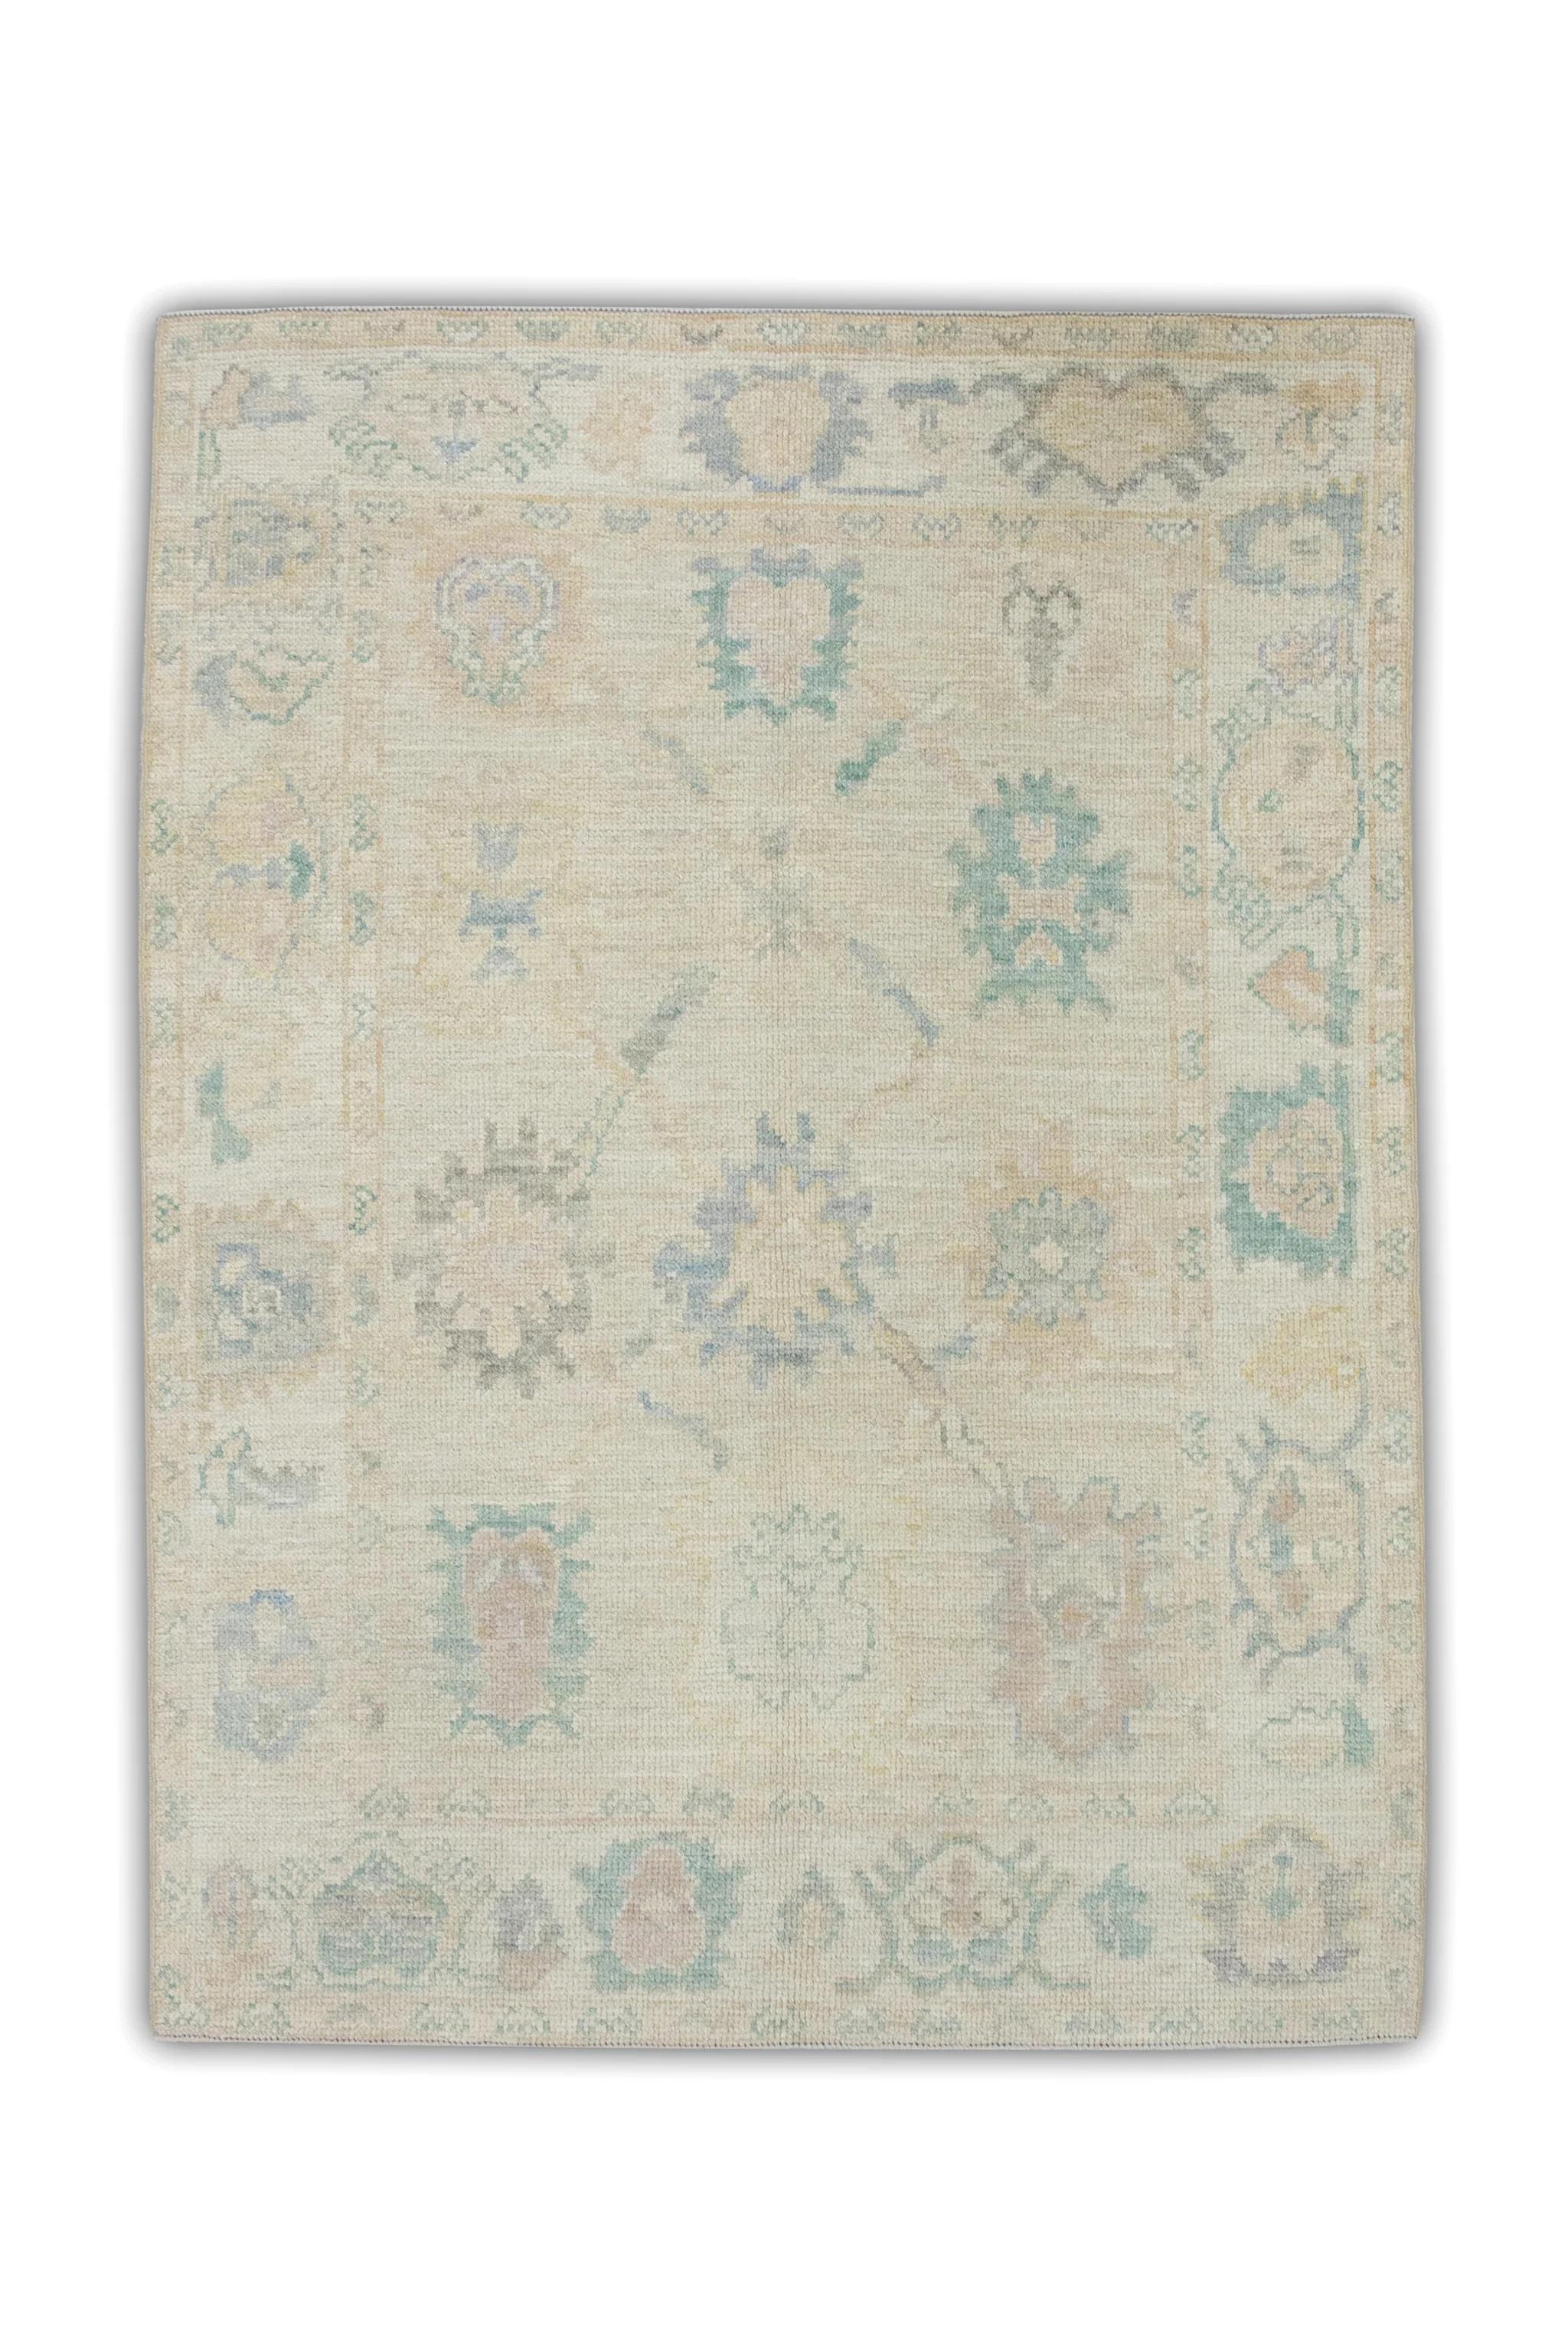 Contemporary Multicolor Handwoven Wool Turkish Oushak Rug in Floral Design 4' x 5'9